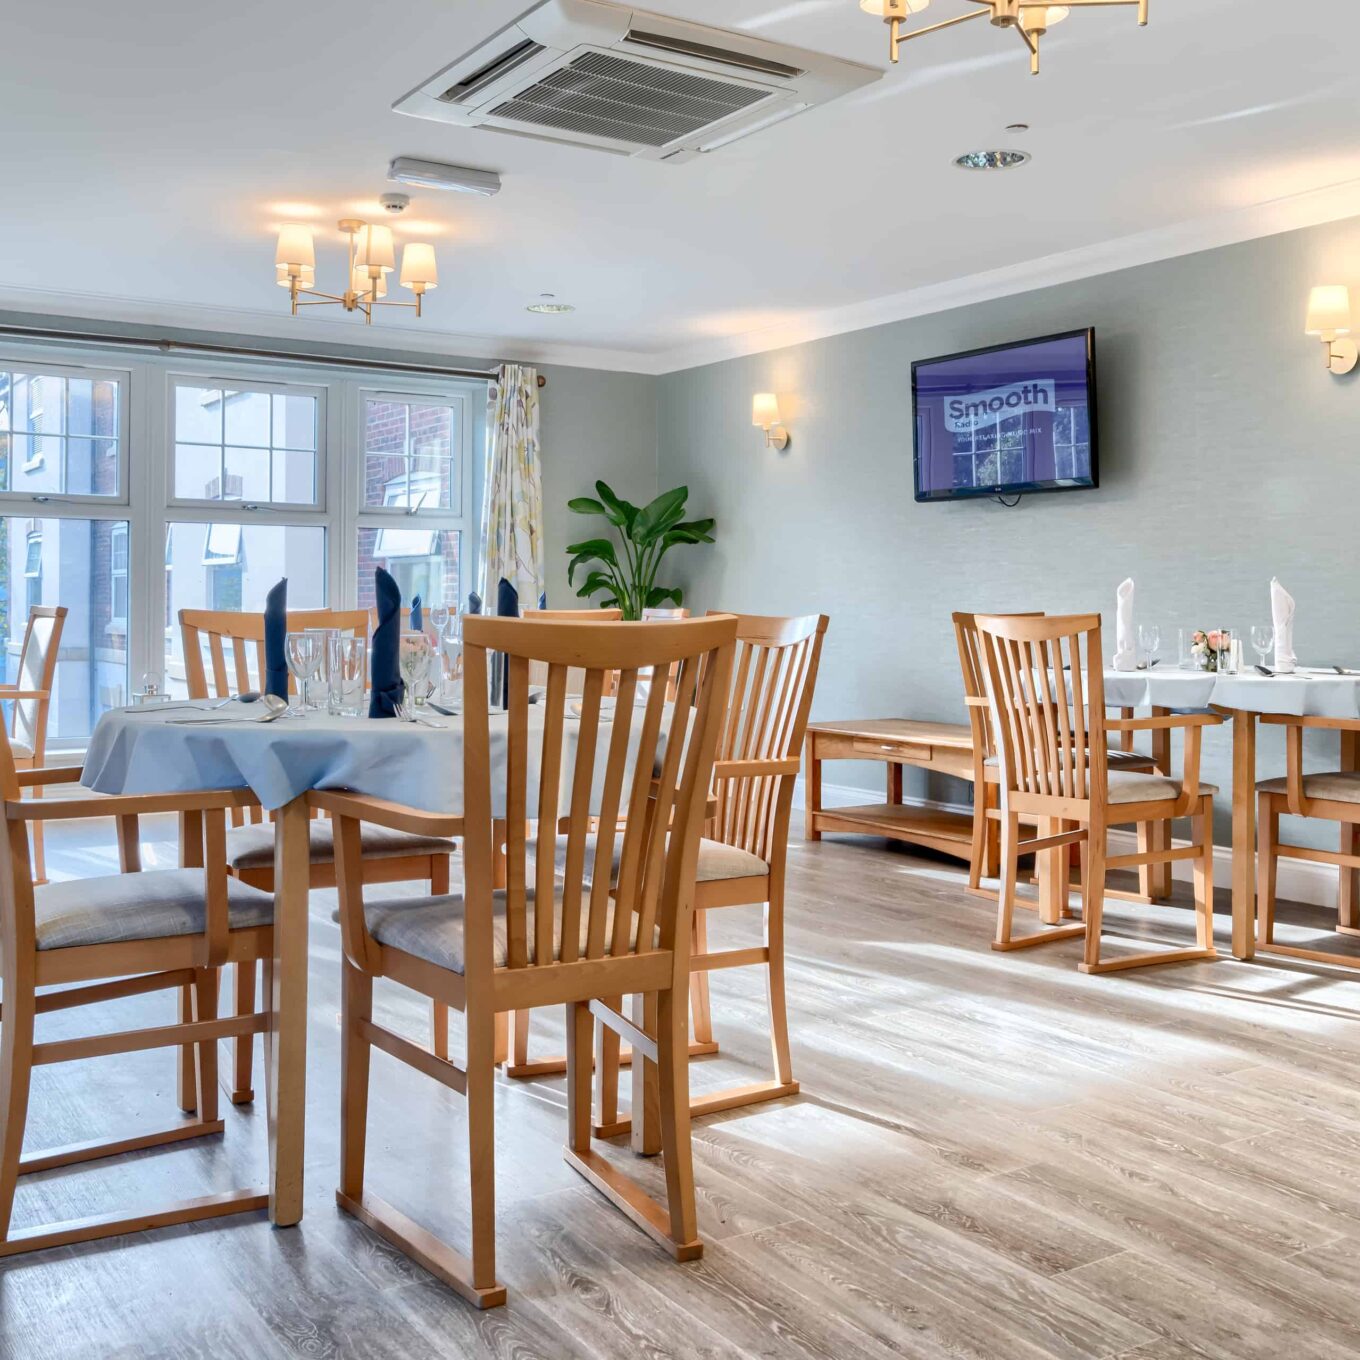 Smooth radio playing on TV in dining room at Woodland Grove Care Home